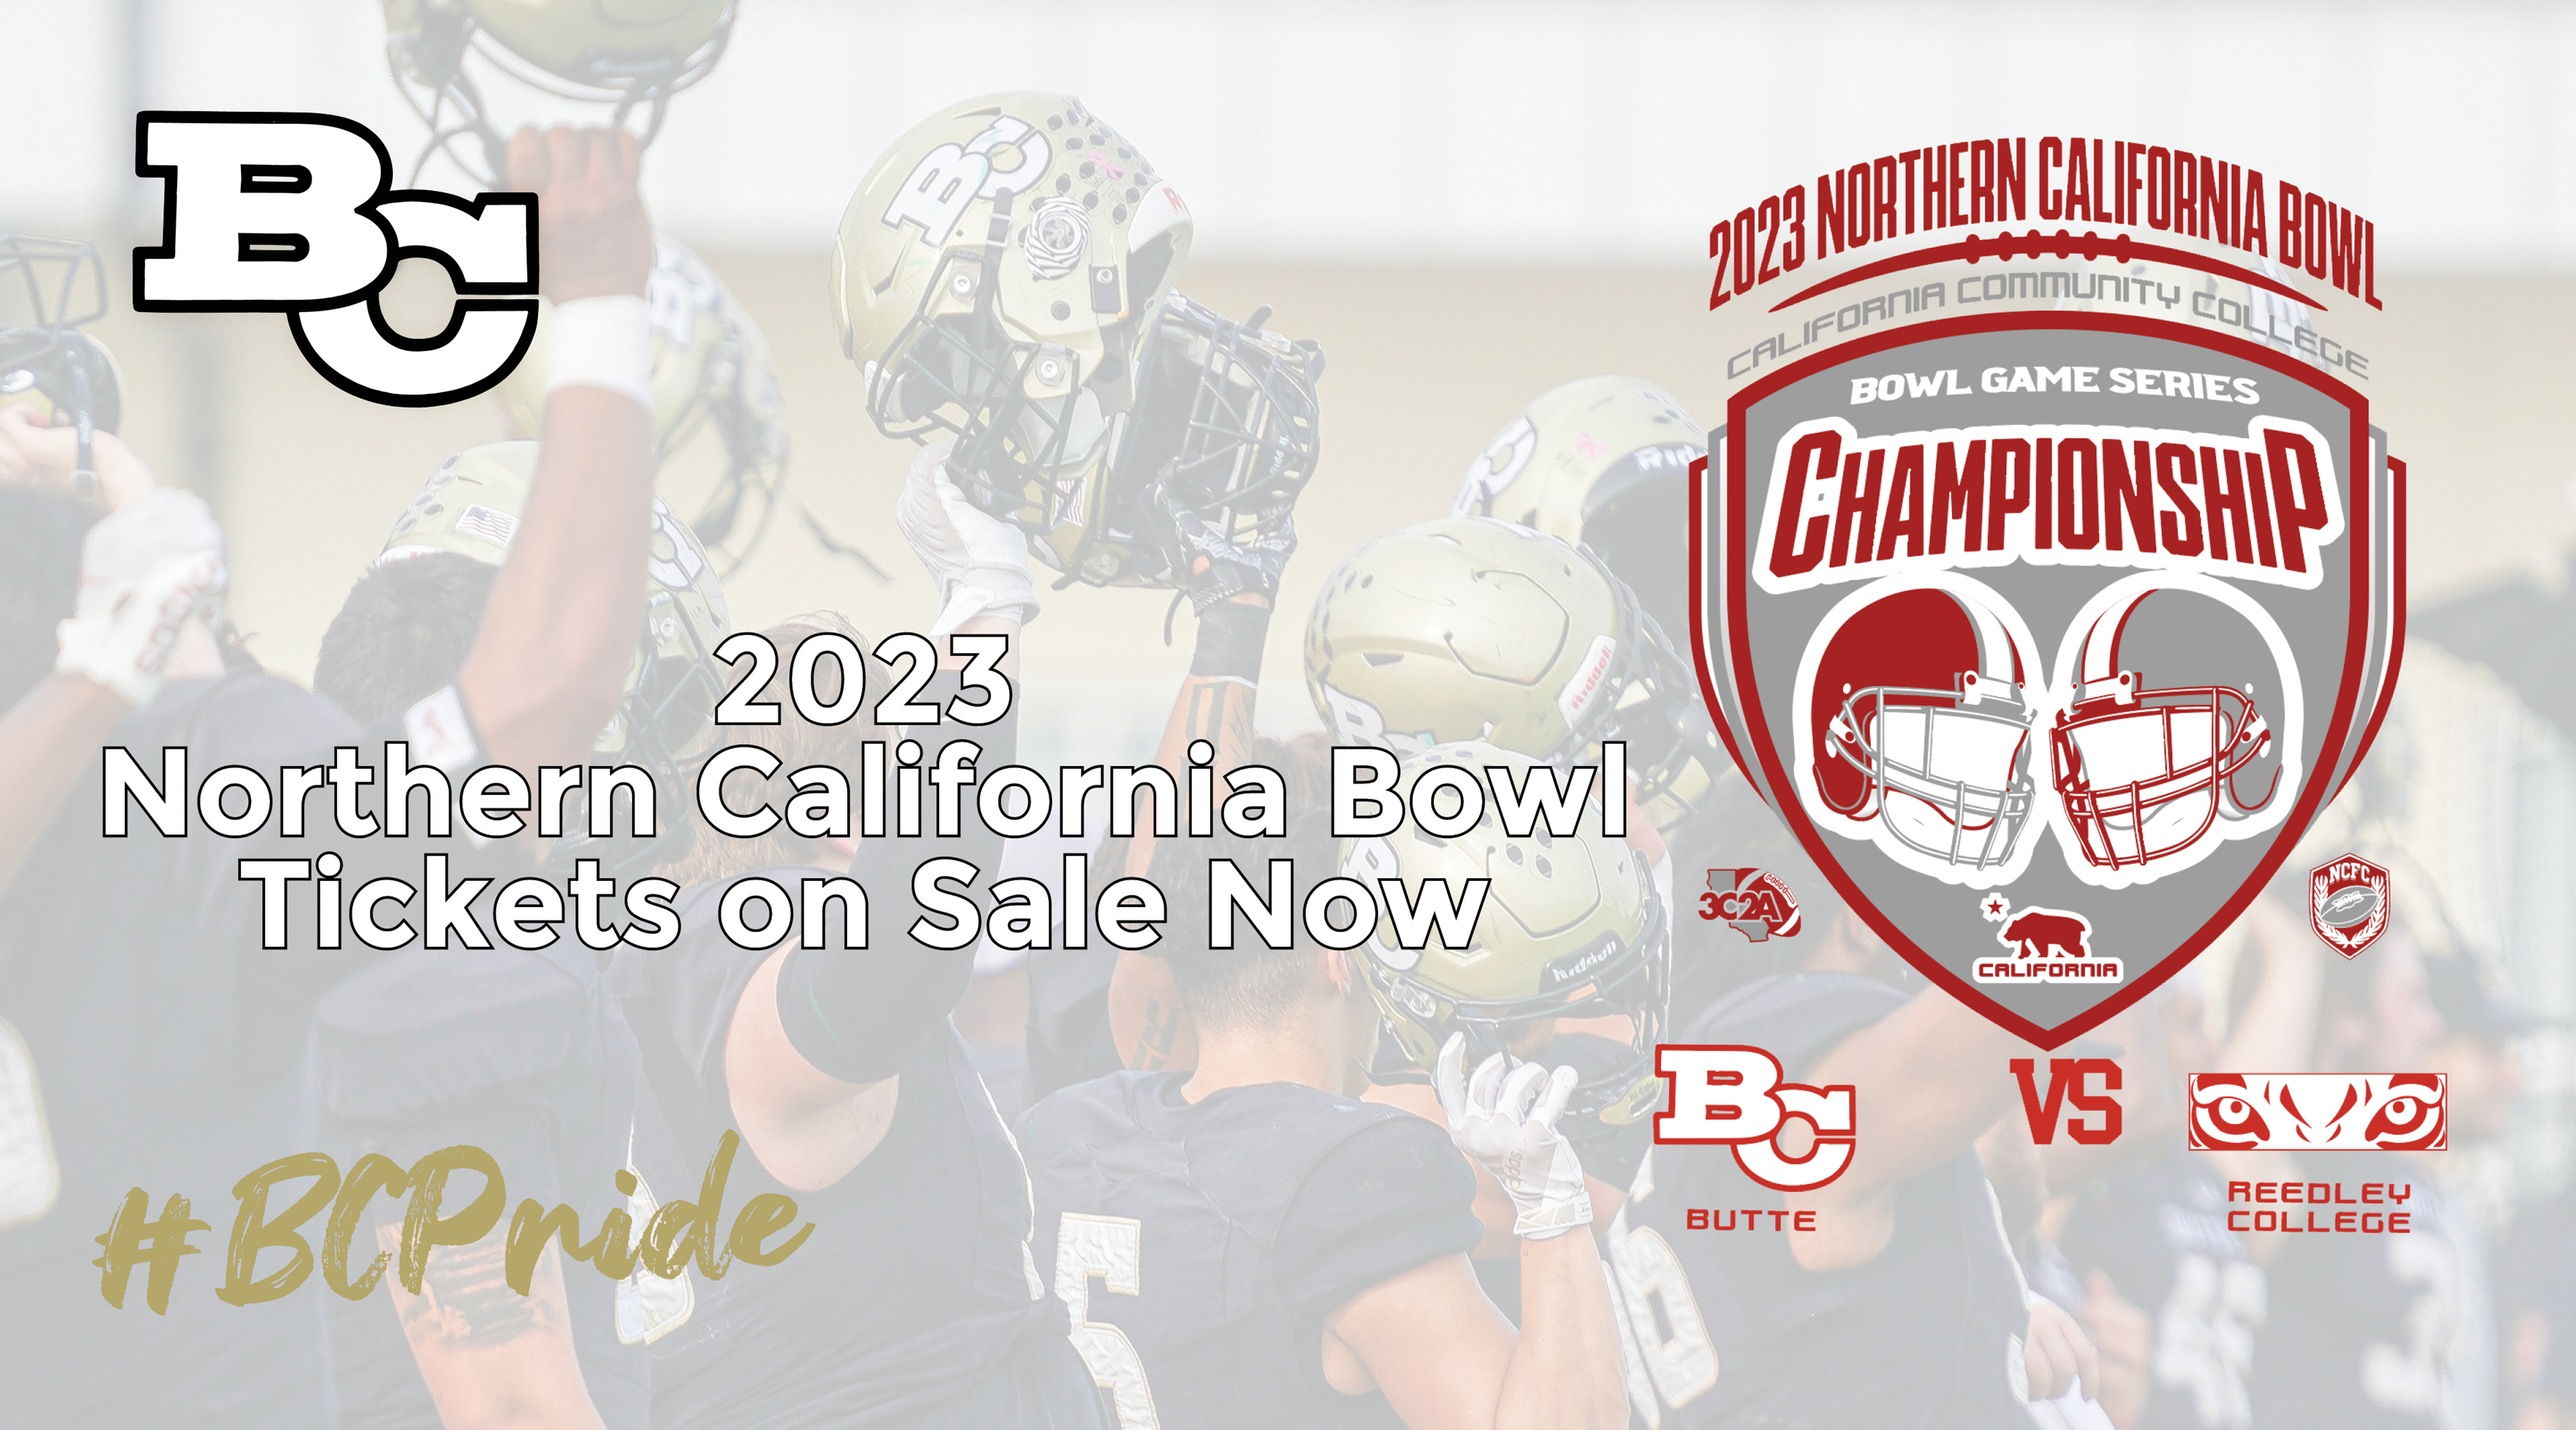 Tickets On Sale Now for Northern California Bowl